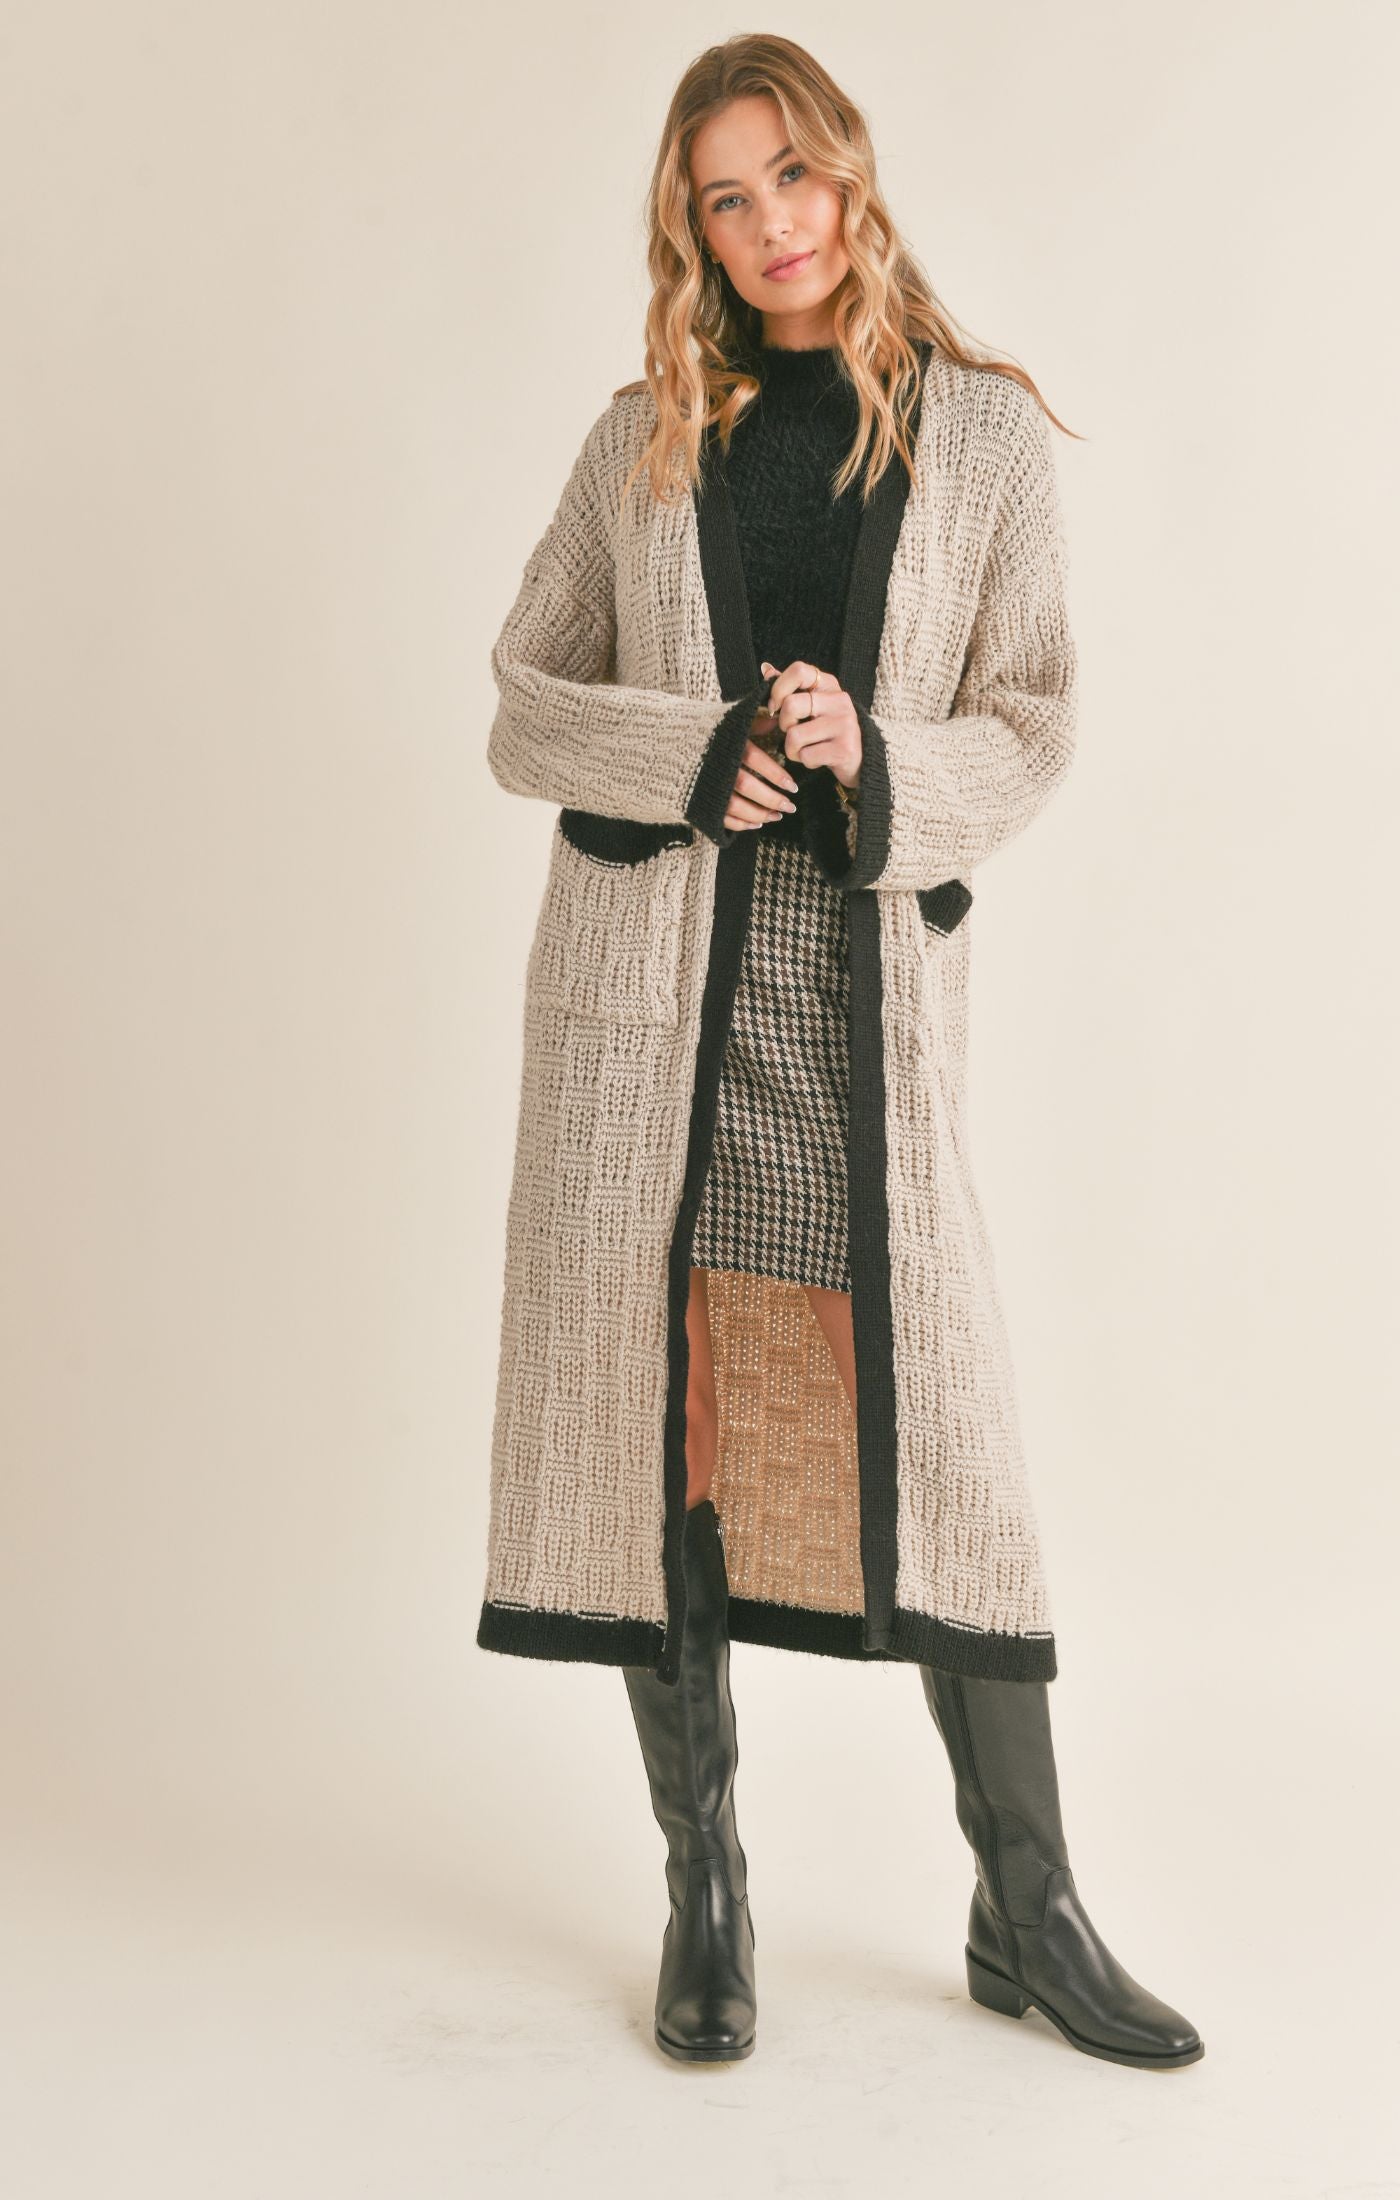 ZENNI TEXTURED KNIT LONG CARDIGAN-taupe,long cardigan,black edges,front pockets,knitted